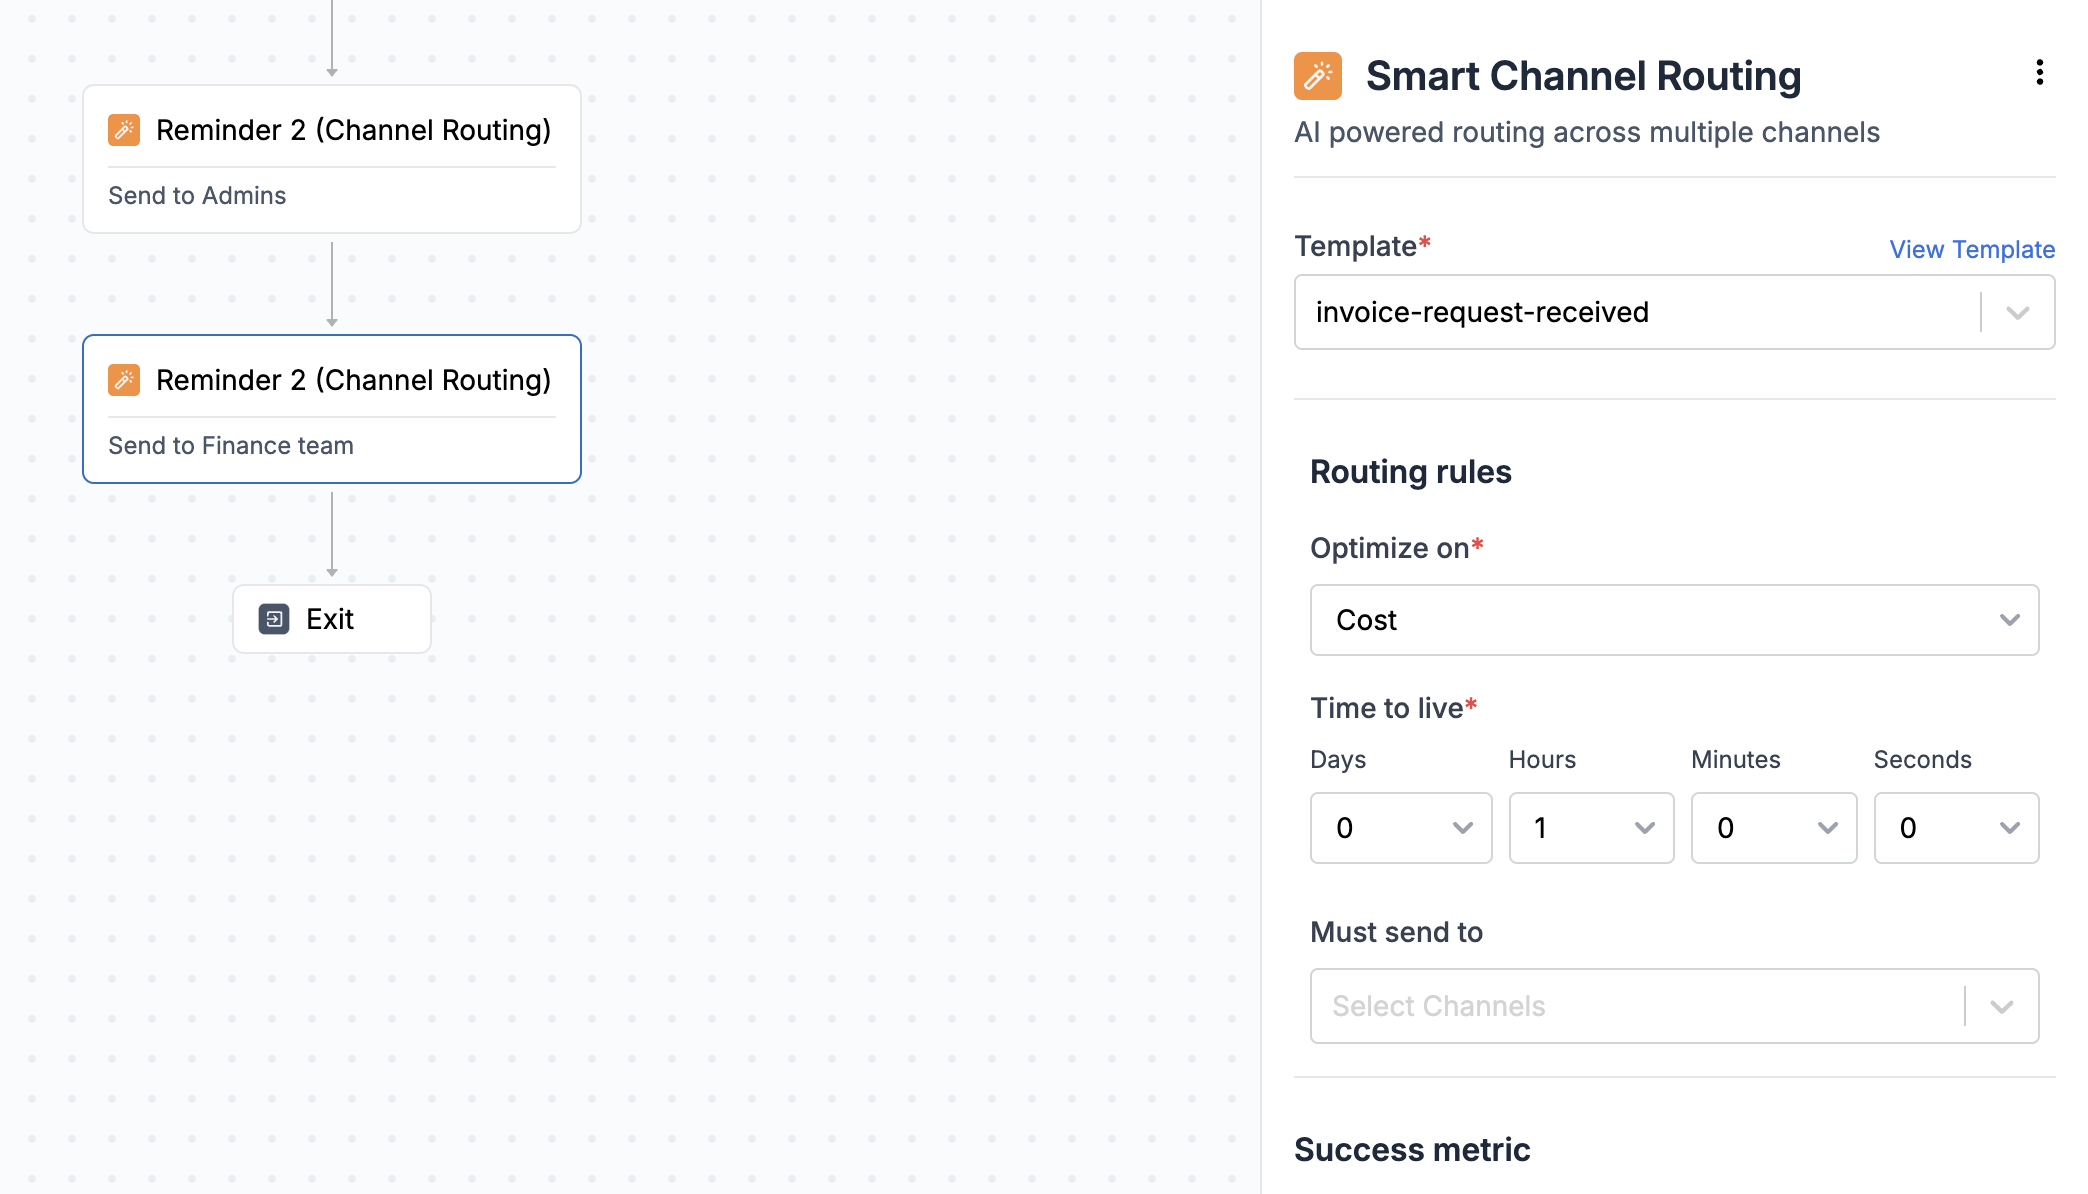 Smart Channel Routing configured to send reminder across Email and Inbox